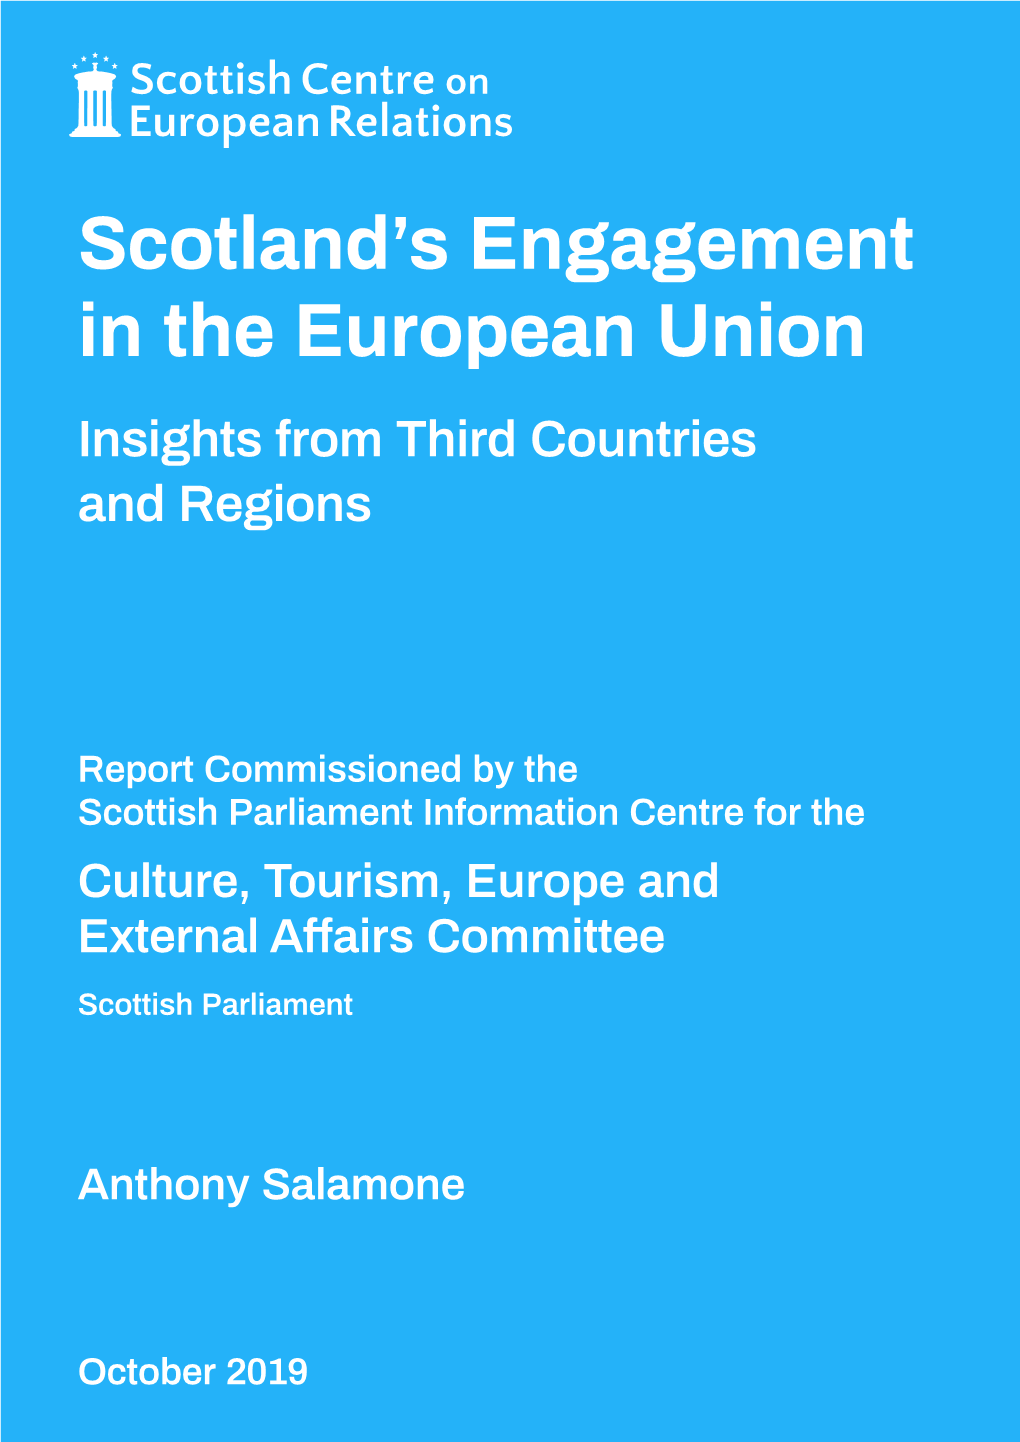 Scotland's Engagement in the European Union